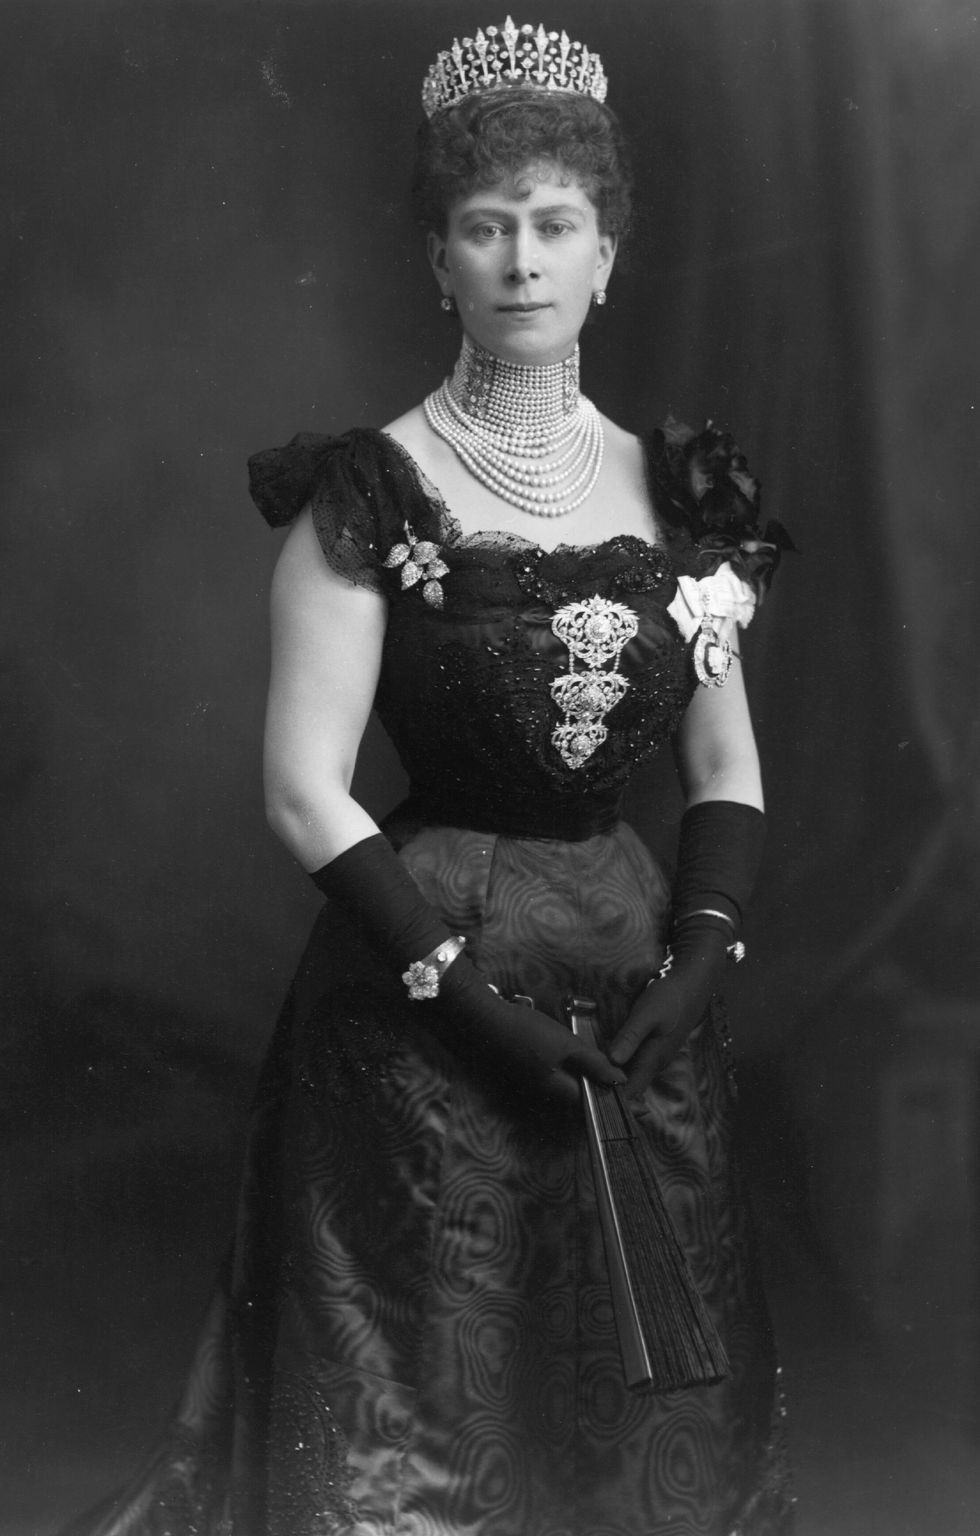 february 1901  mary of teck 1867   1953 formerly princess victoria mary augusta louise olga pauline claudine agnes of teck, who married prince george in 1893, to become queen mary in 1910 she is viewed as the duchess of york  photo by hulton archivegetty images